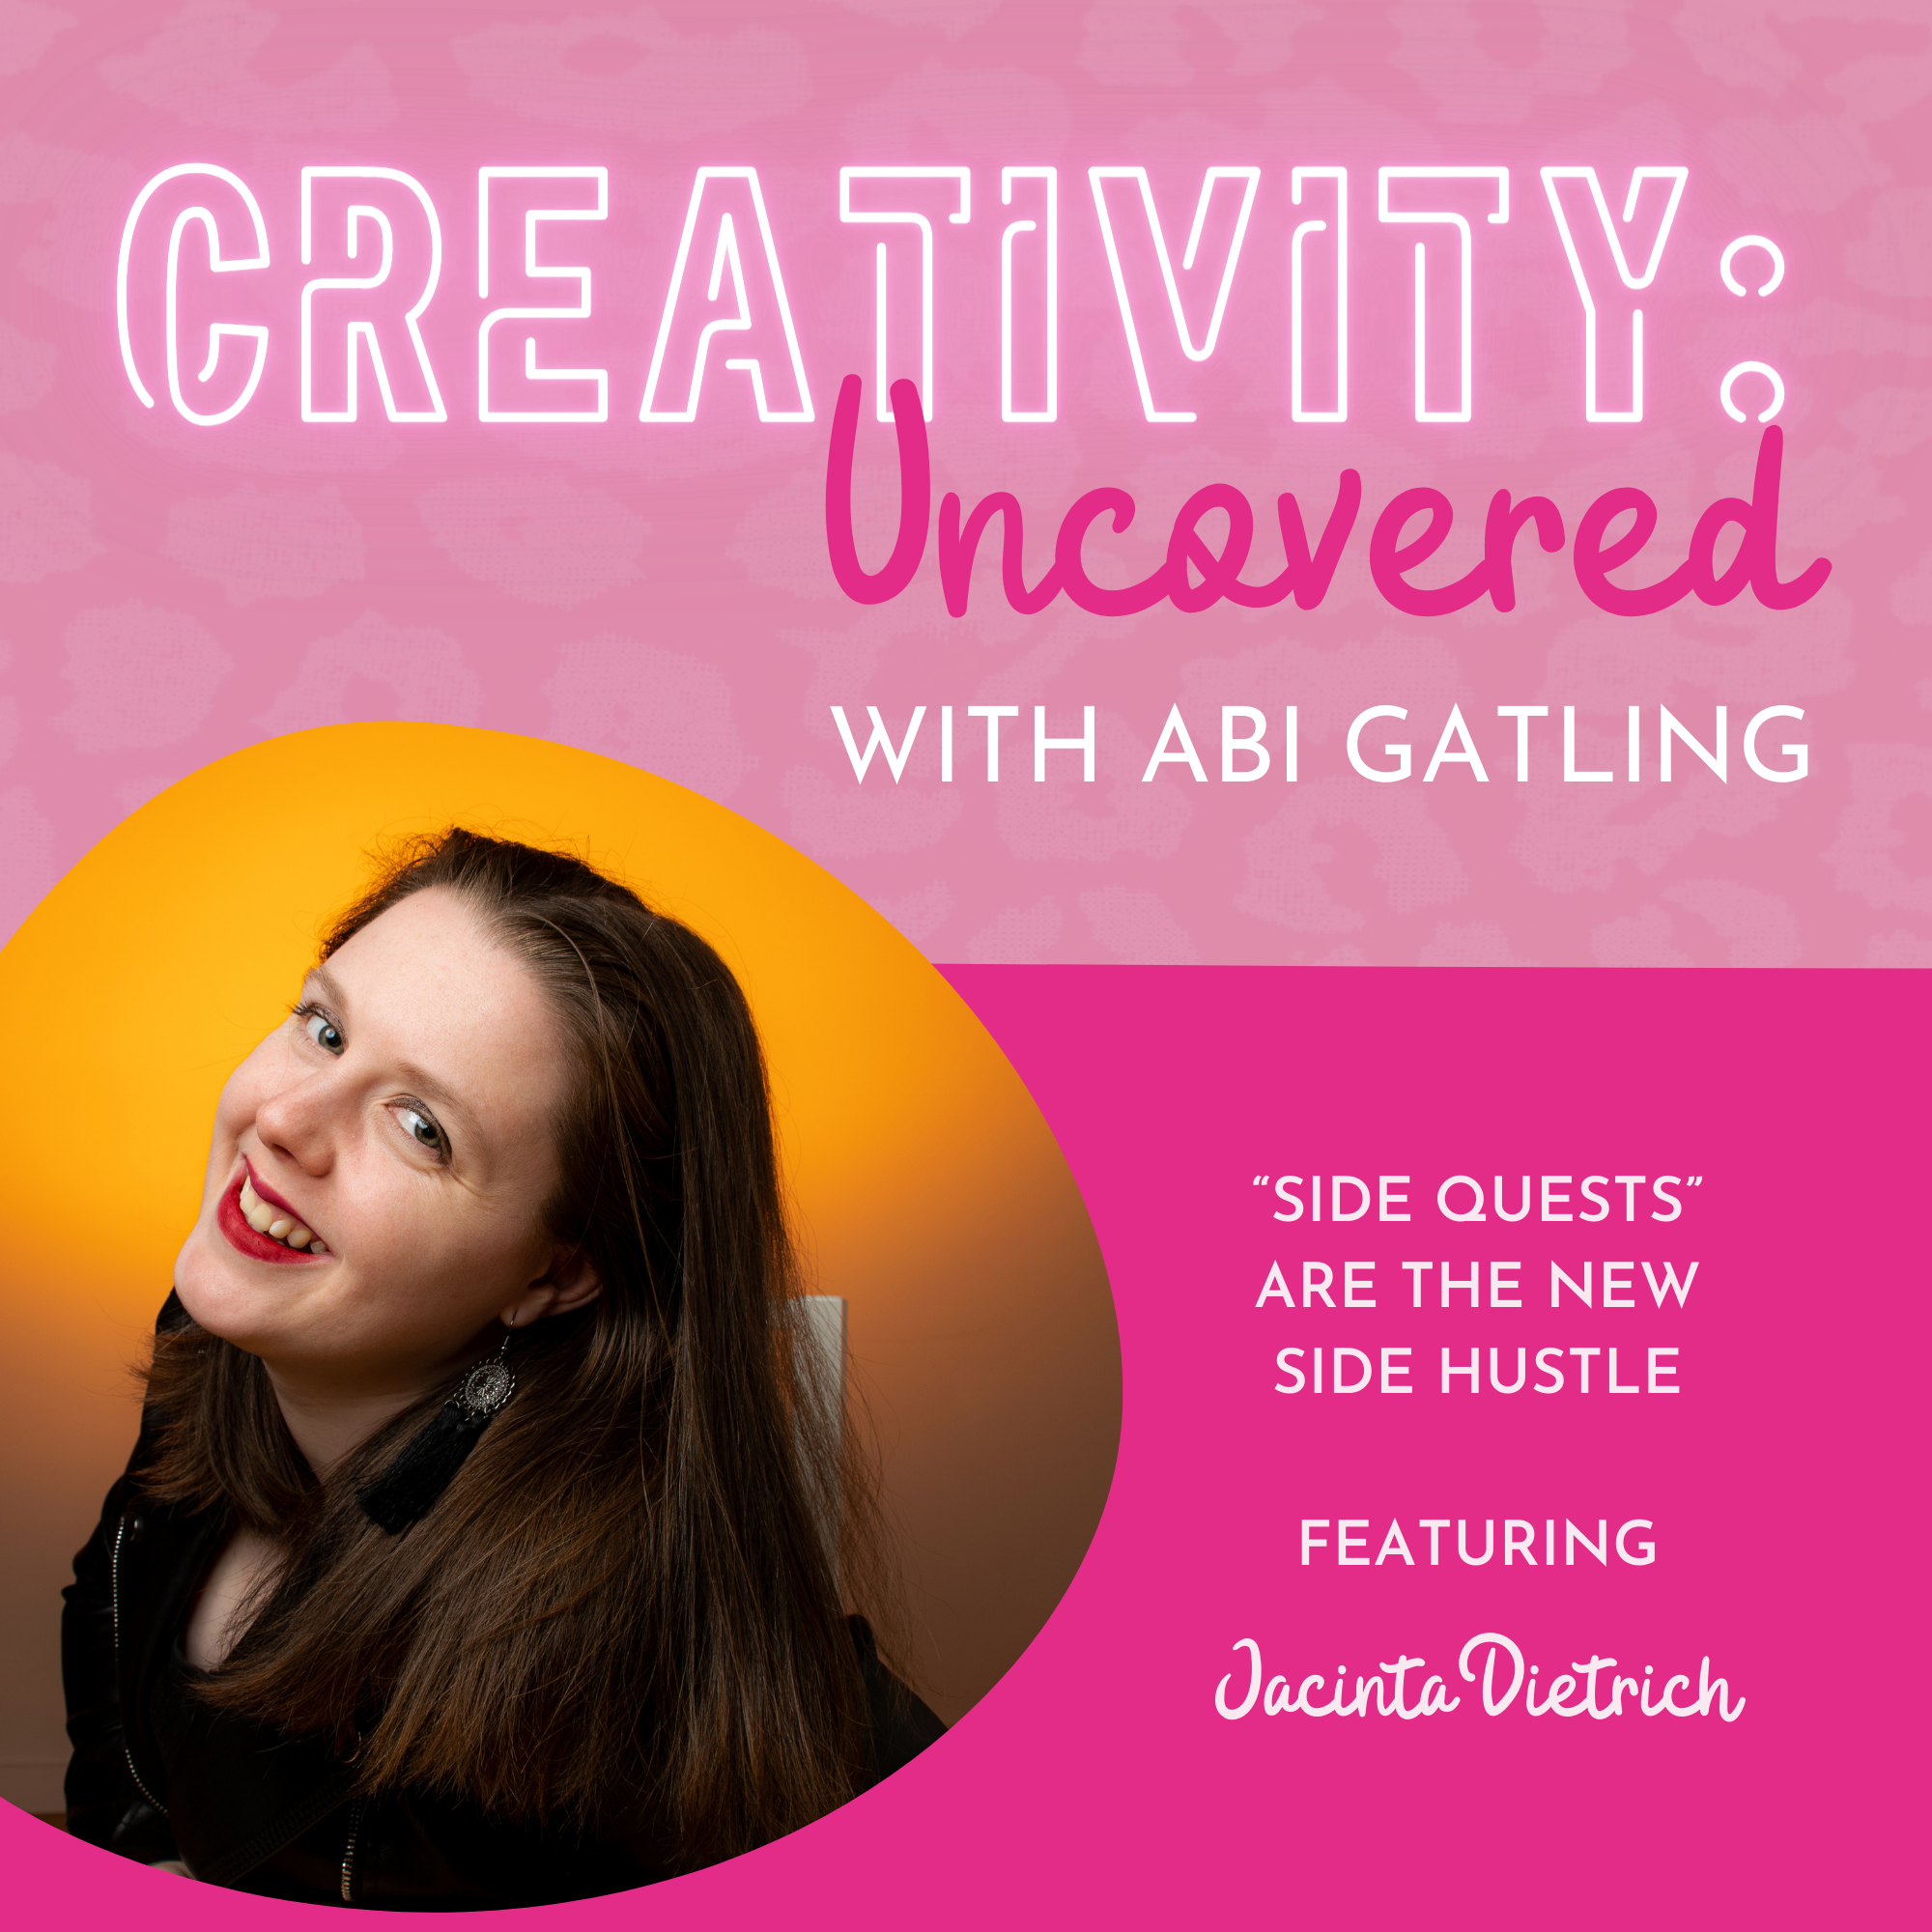 Creativity: Uncovered podcast episode graphic featuring guest Jacinta Dietrich